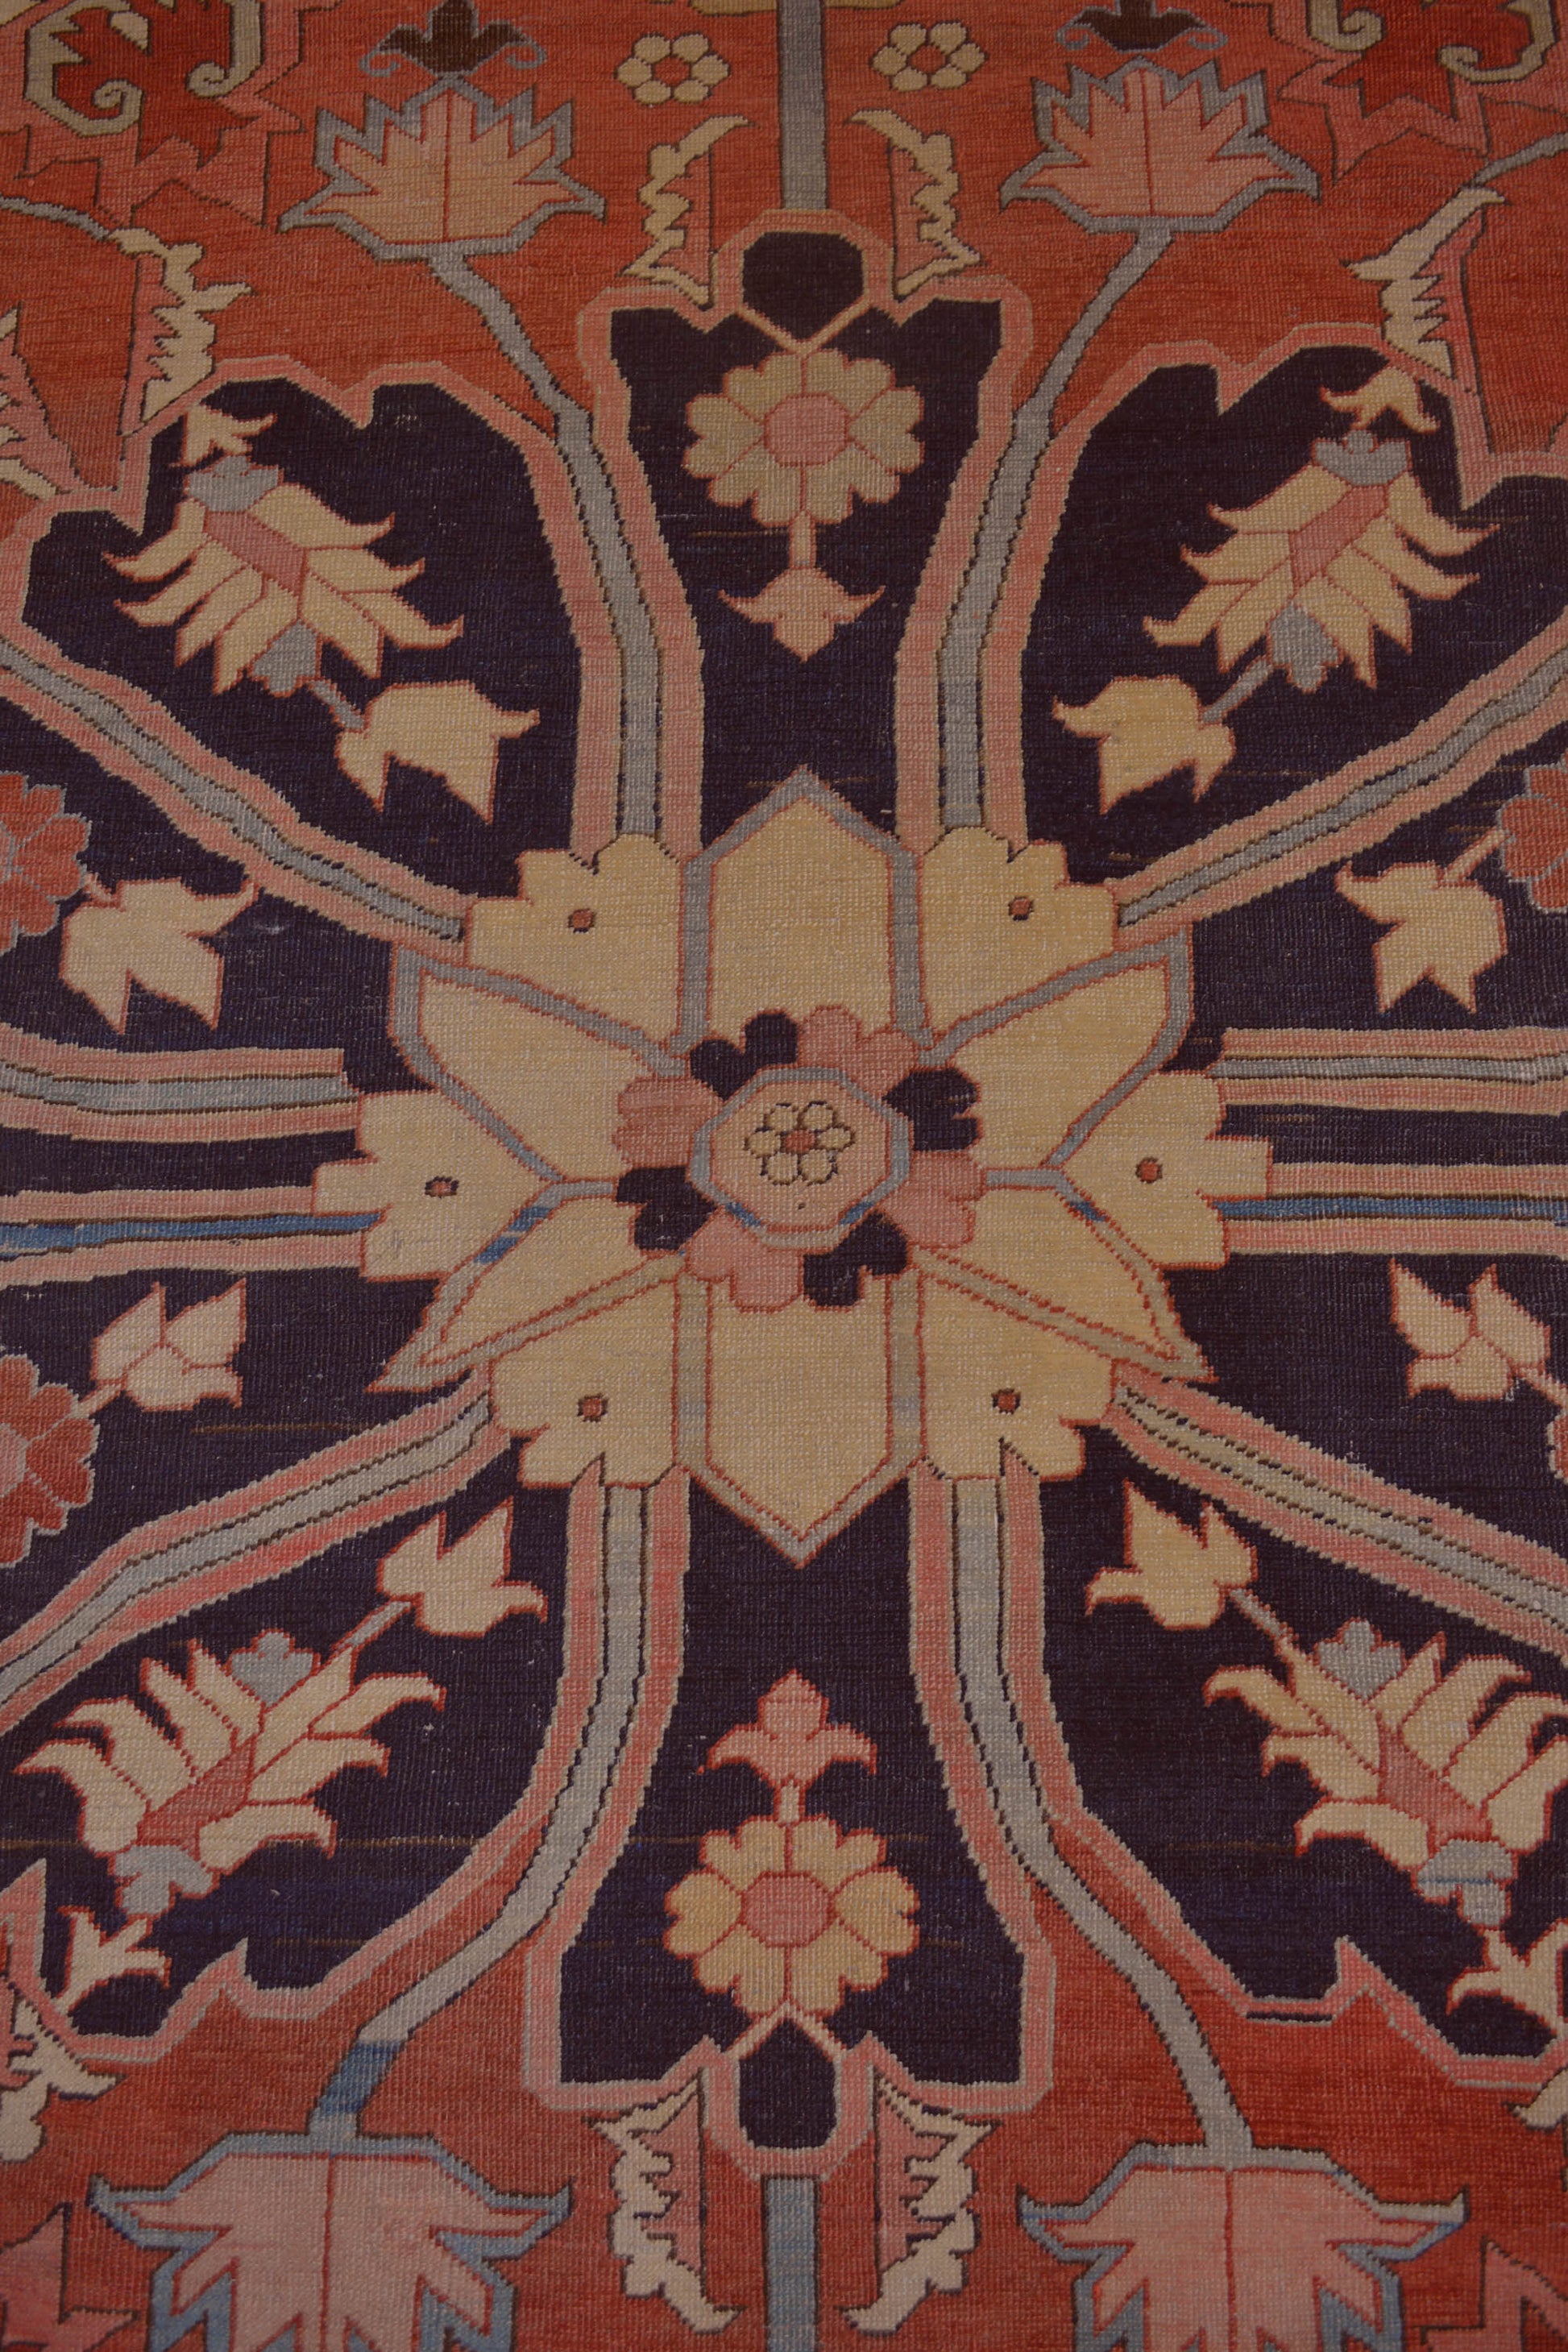 The central focal area has a large black flower holding a secondary beige flower in the middle, and the same design is placed in each corner of the central area of ​​the rug.